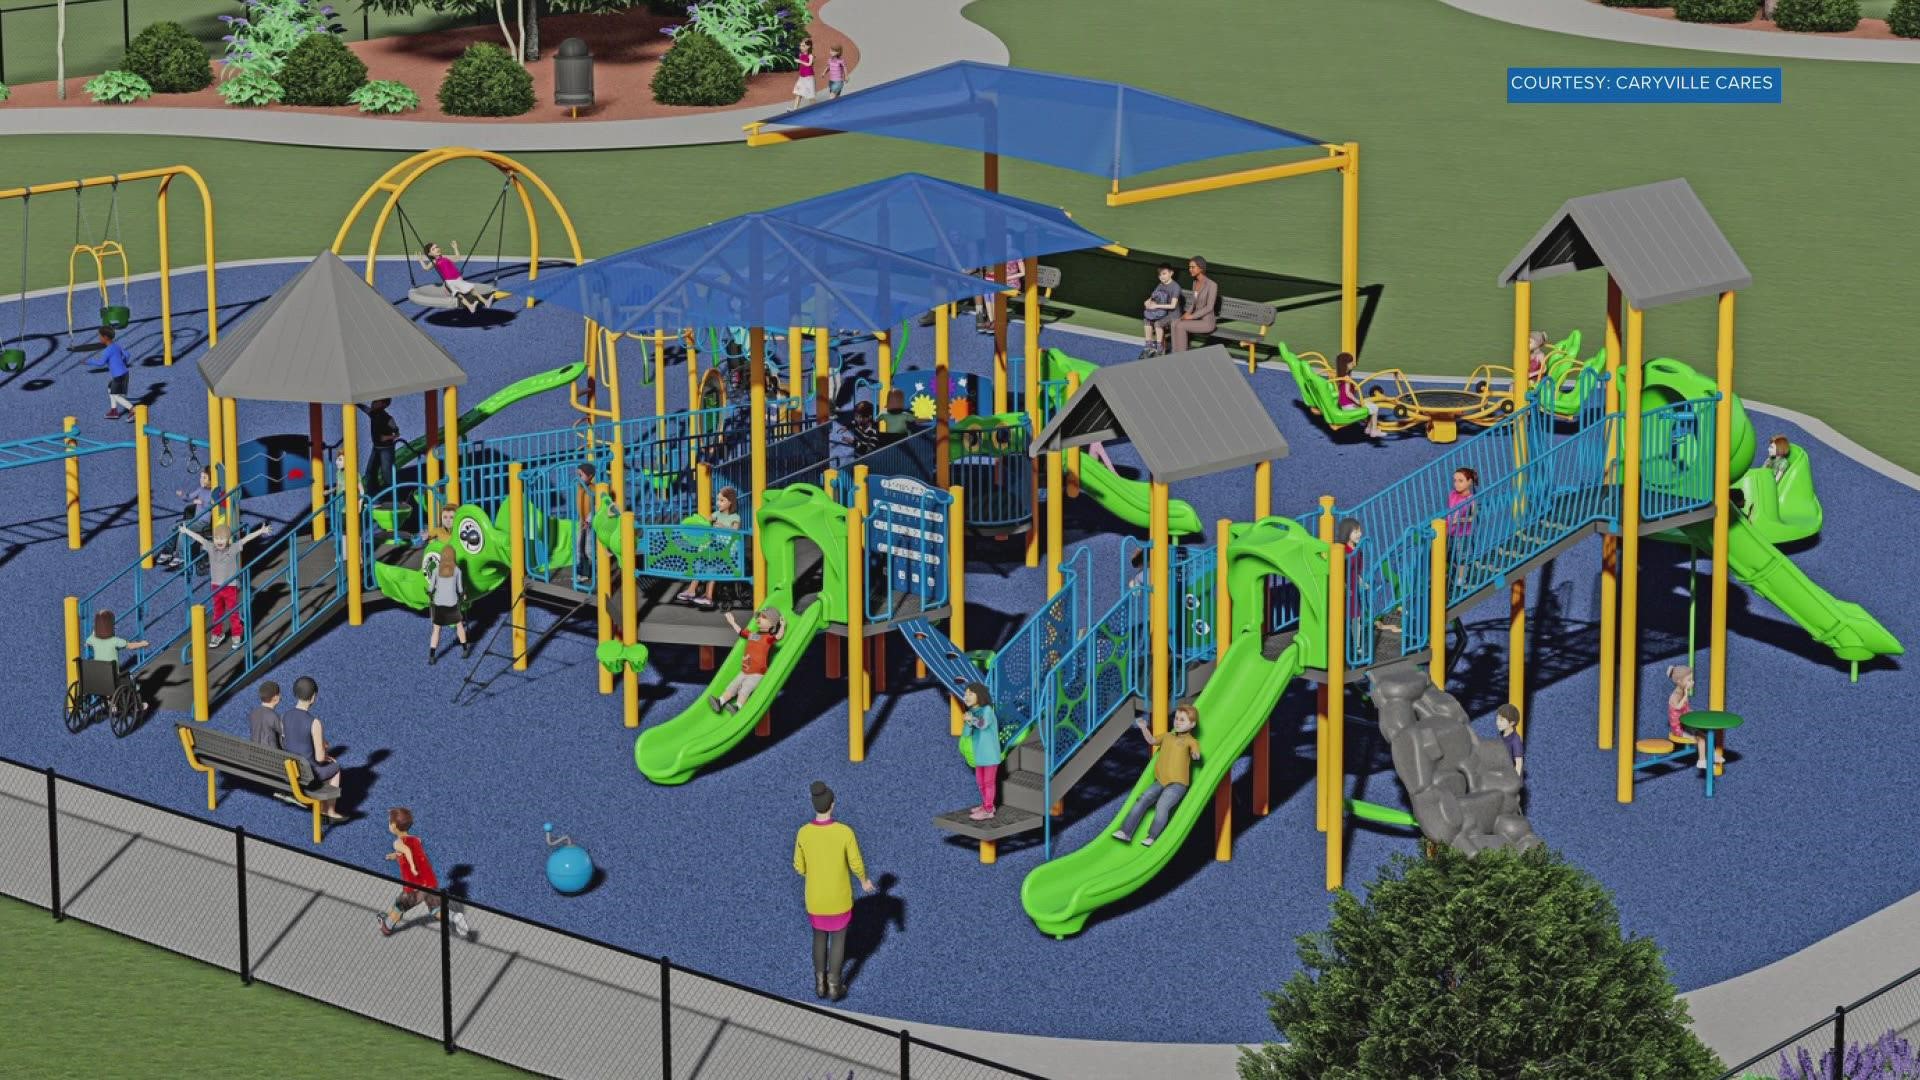 A place for children of all abilities to have fun in Campbell County is becoming a reality.